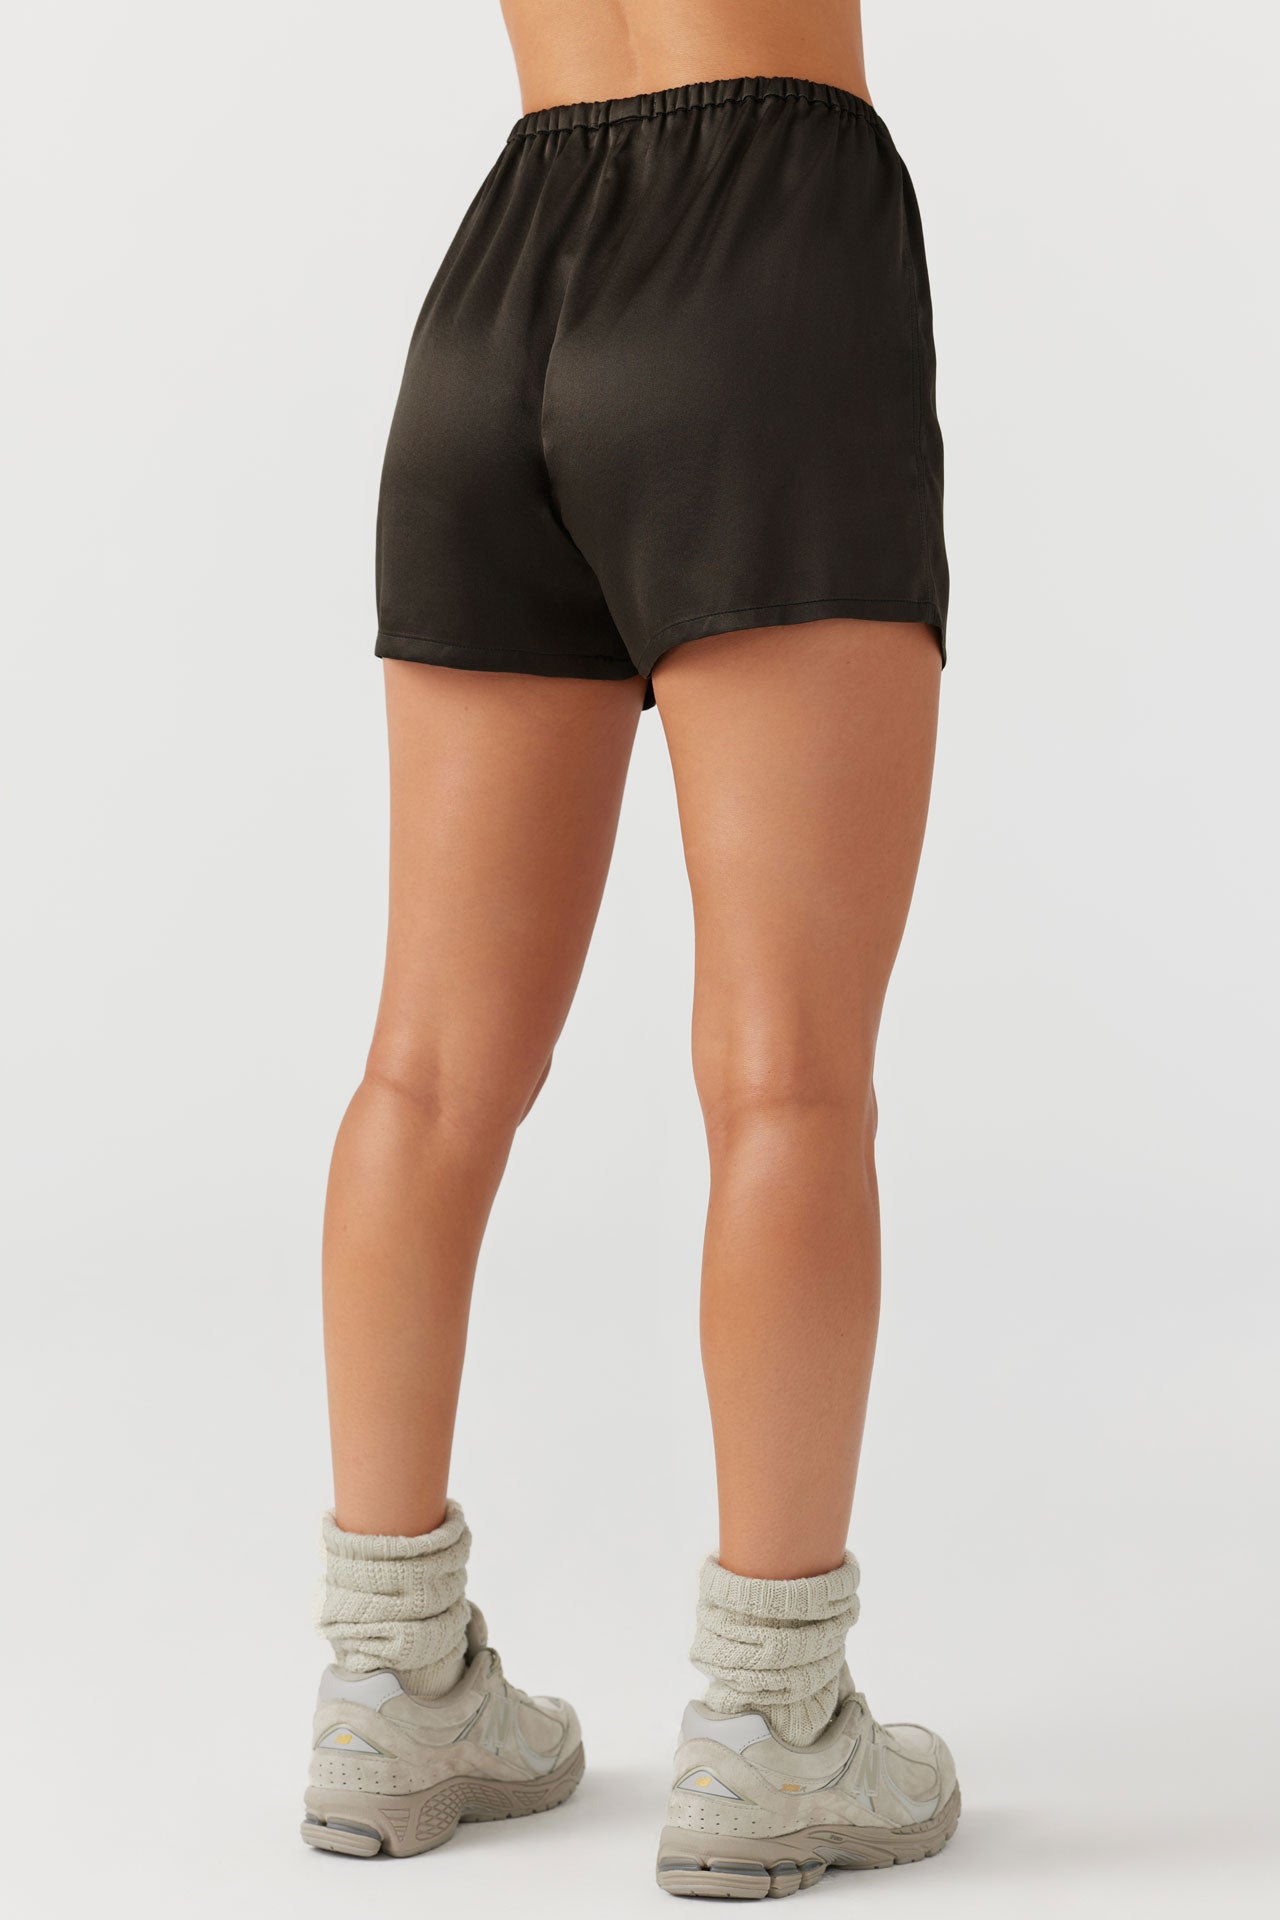 Back view of model from the waist down posing in the comfortable, boxer-style espresso Relaxed Silk Short with an elastic waistband